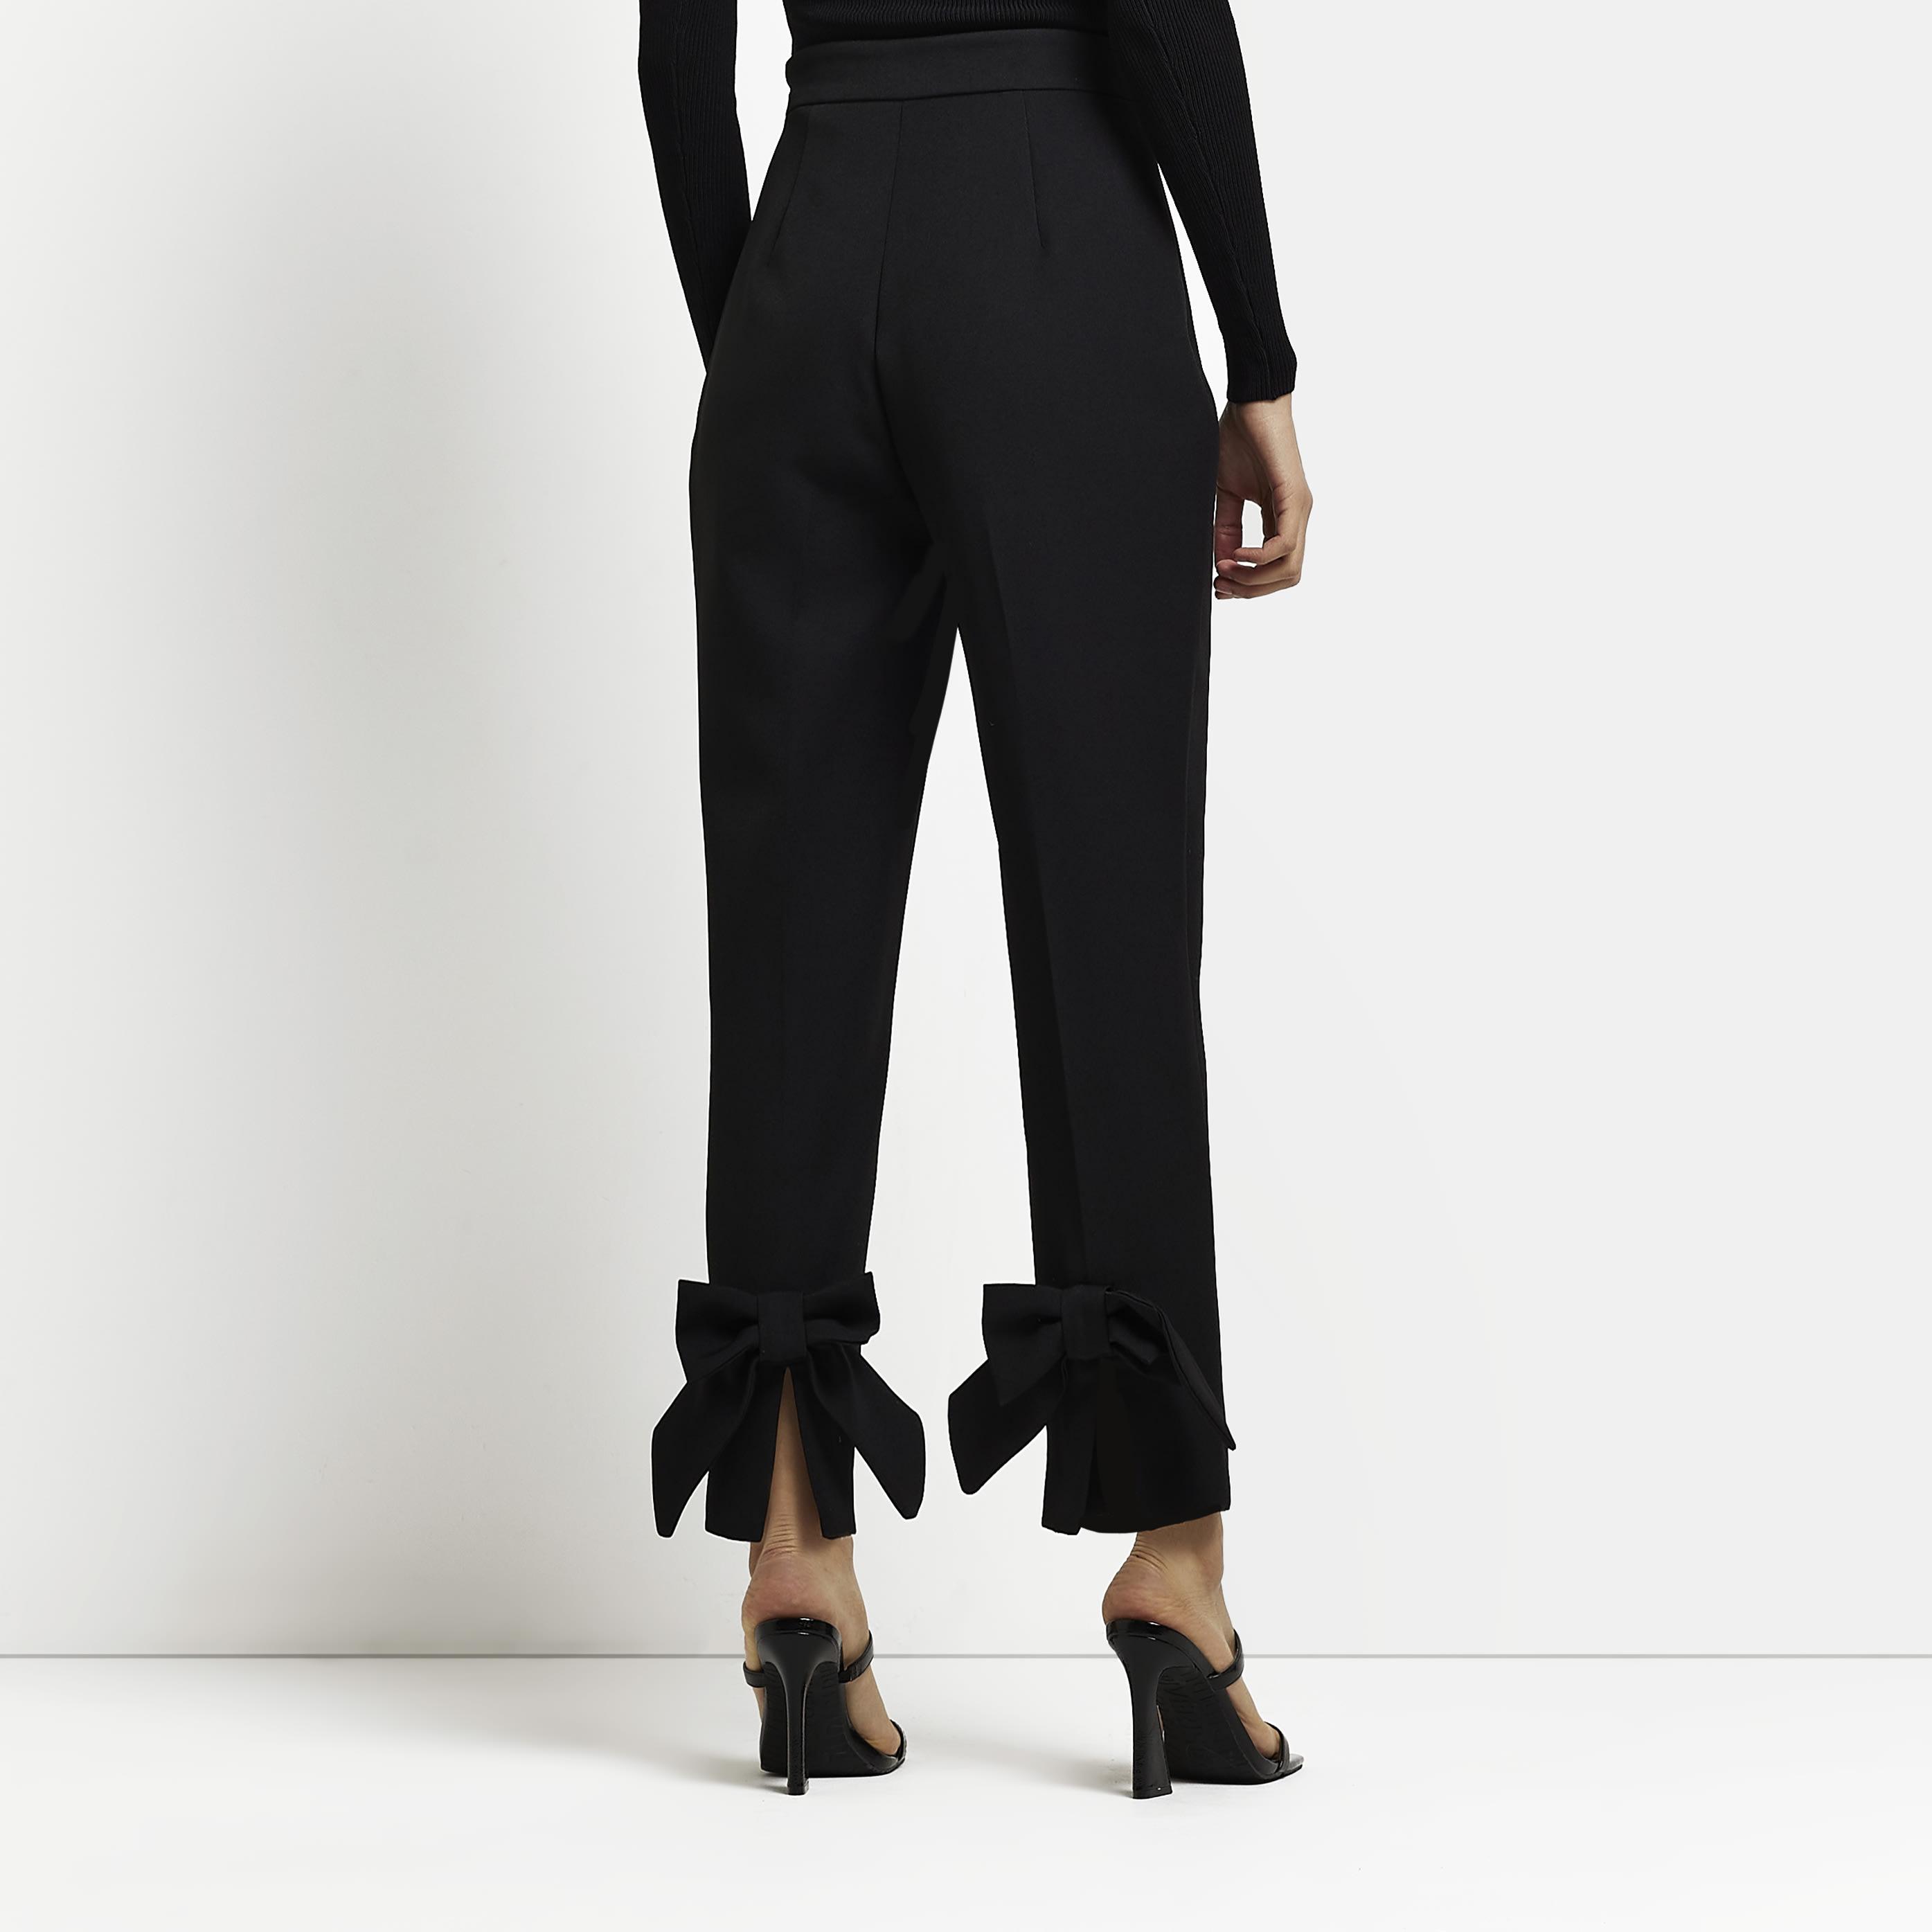 Bow Trousers - Buy Bow Trousers online in India